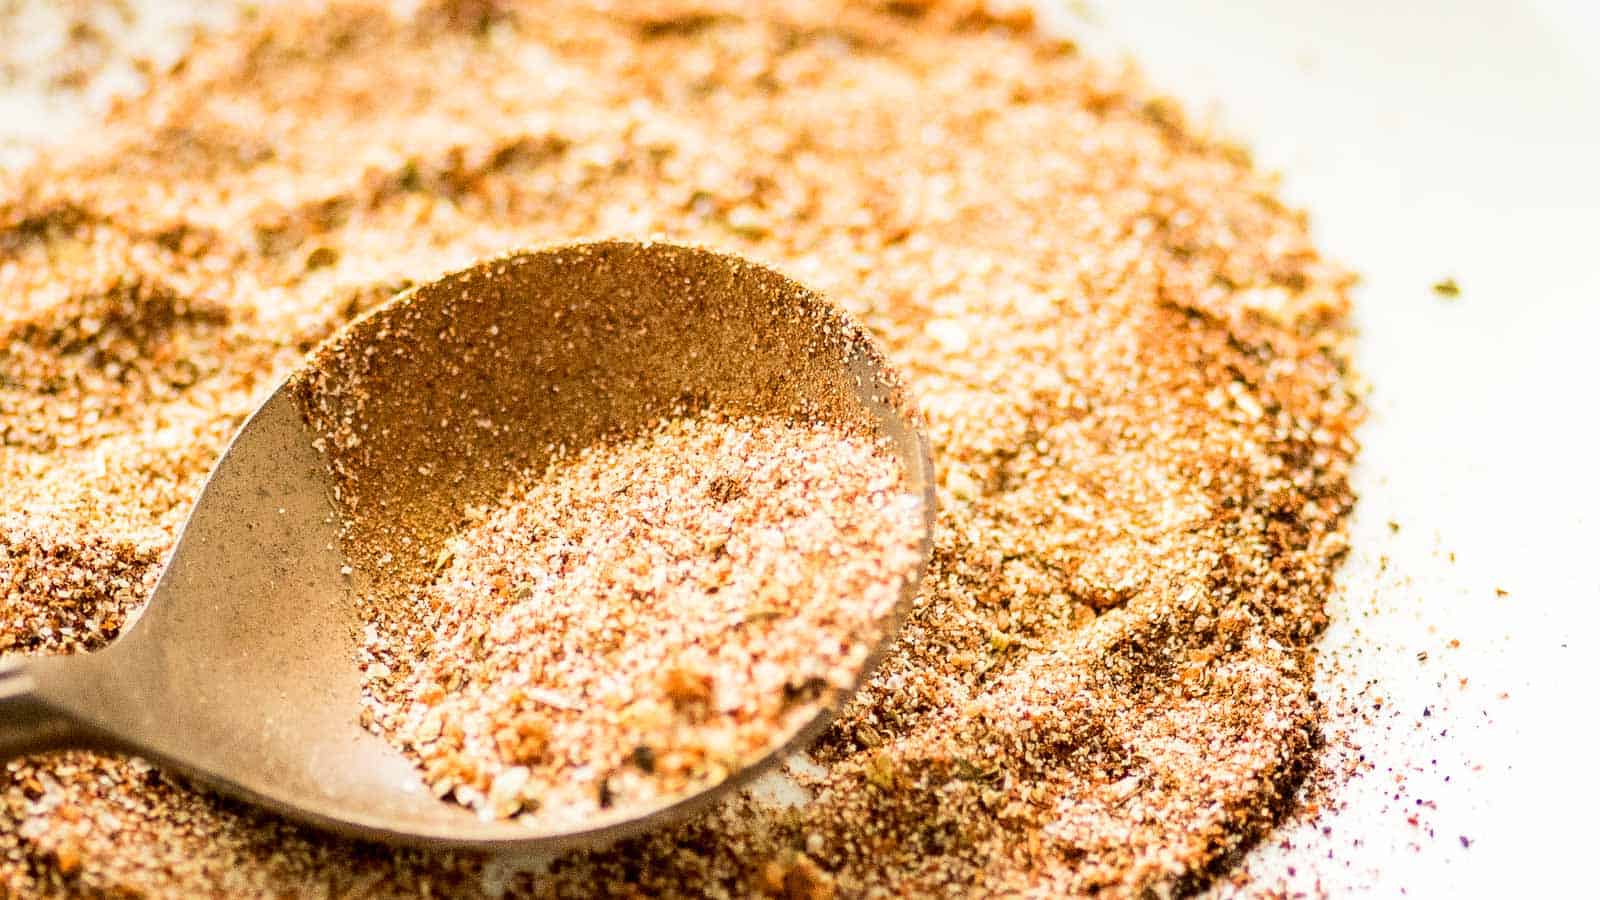 A close-up image of a metal spoon scooping mixed spices and grains on a light surface.